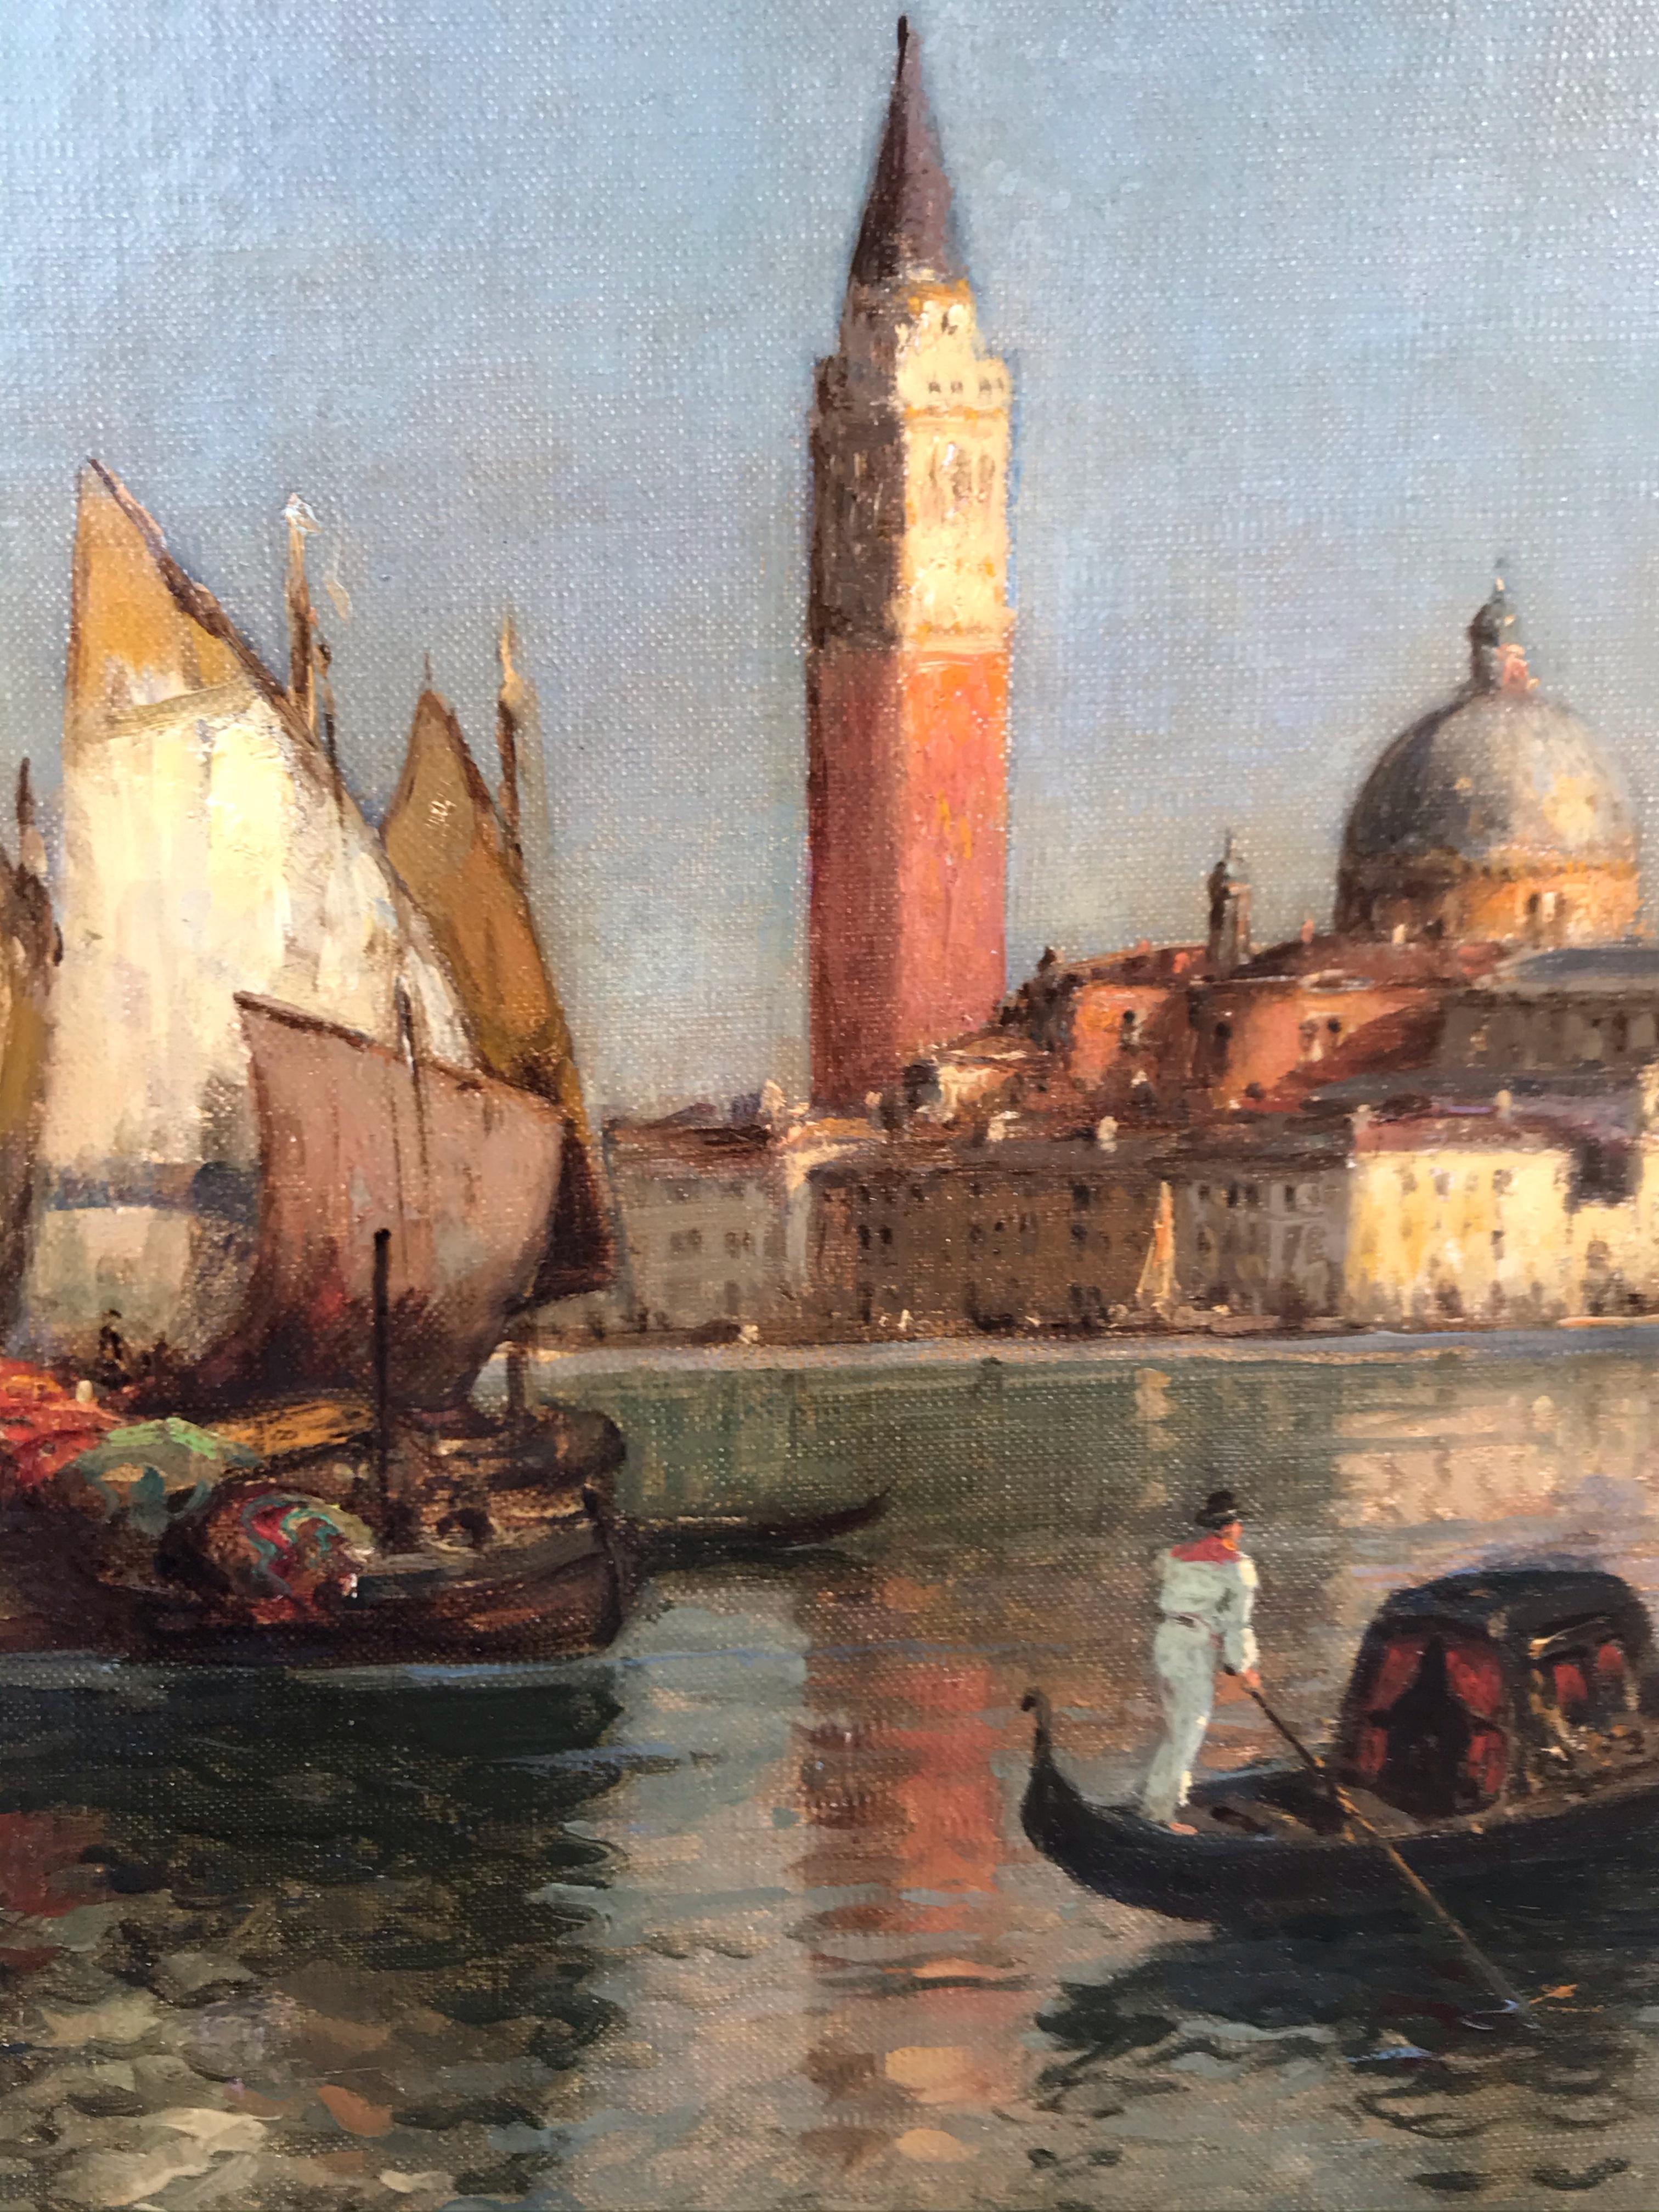 AUGUSTE BOUVARD 1882-1956
Pseudo : Mard ALDINE 
View of Venice with characters
Oil on canvas signed low right 